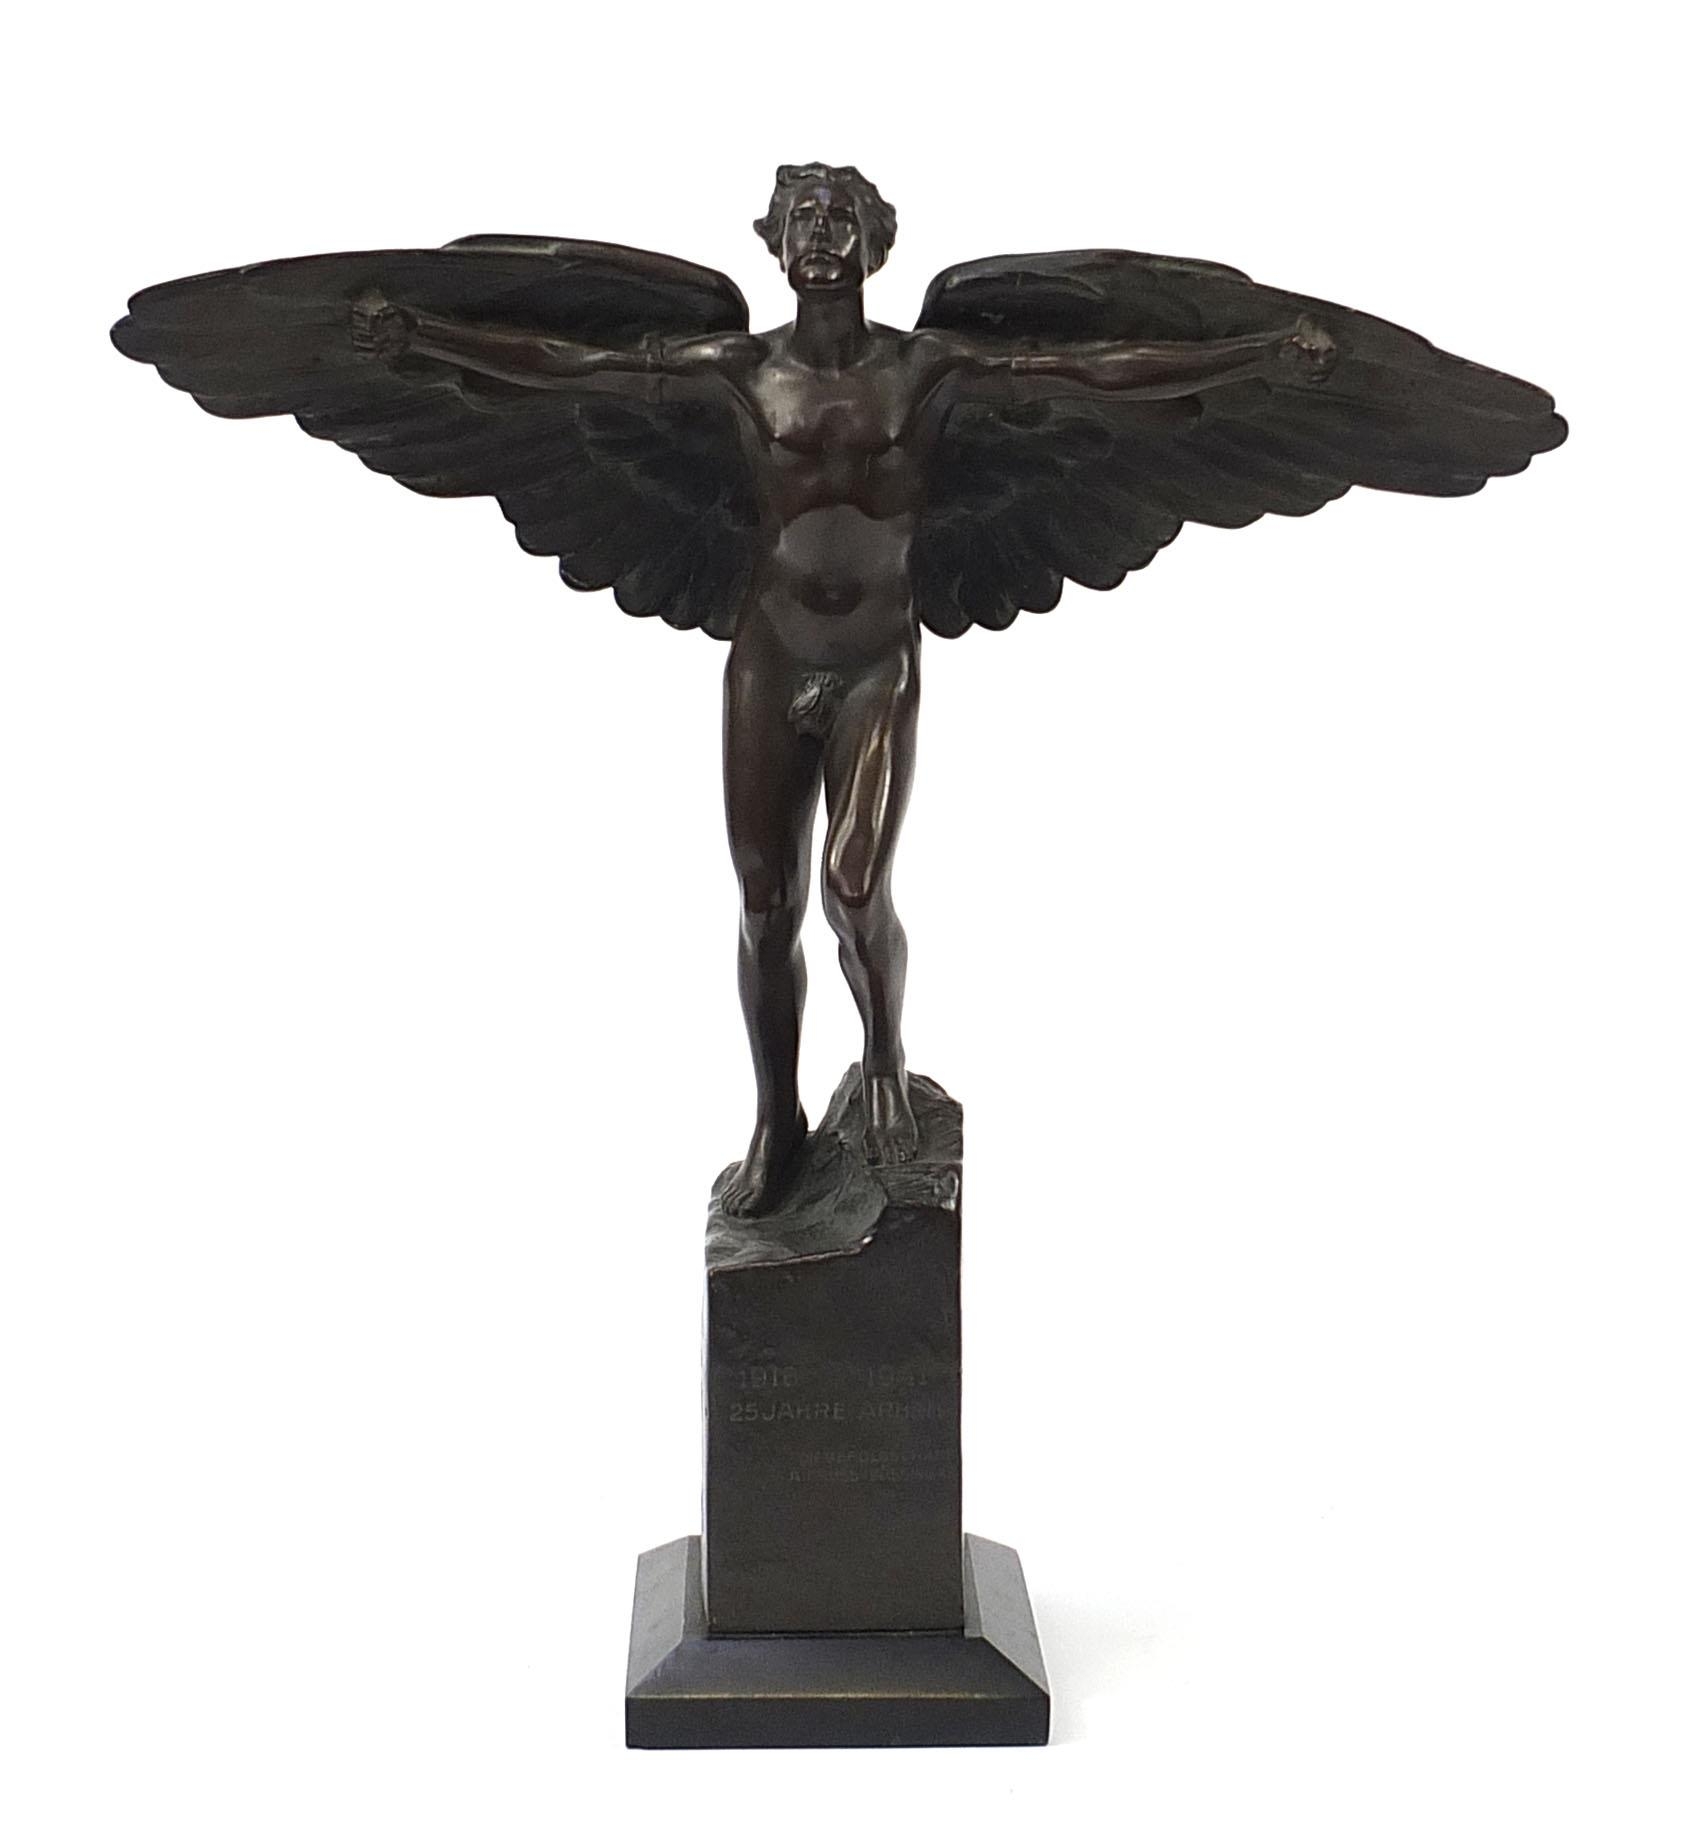 Victor Heinrich Seifert, large patinated bronze figure of a winged nude man, Icarus, raised on a